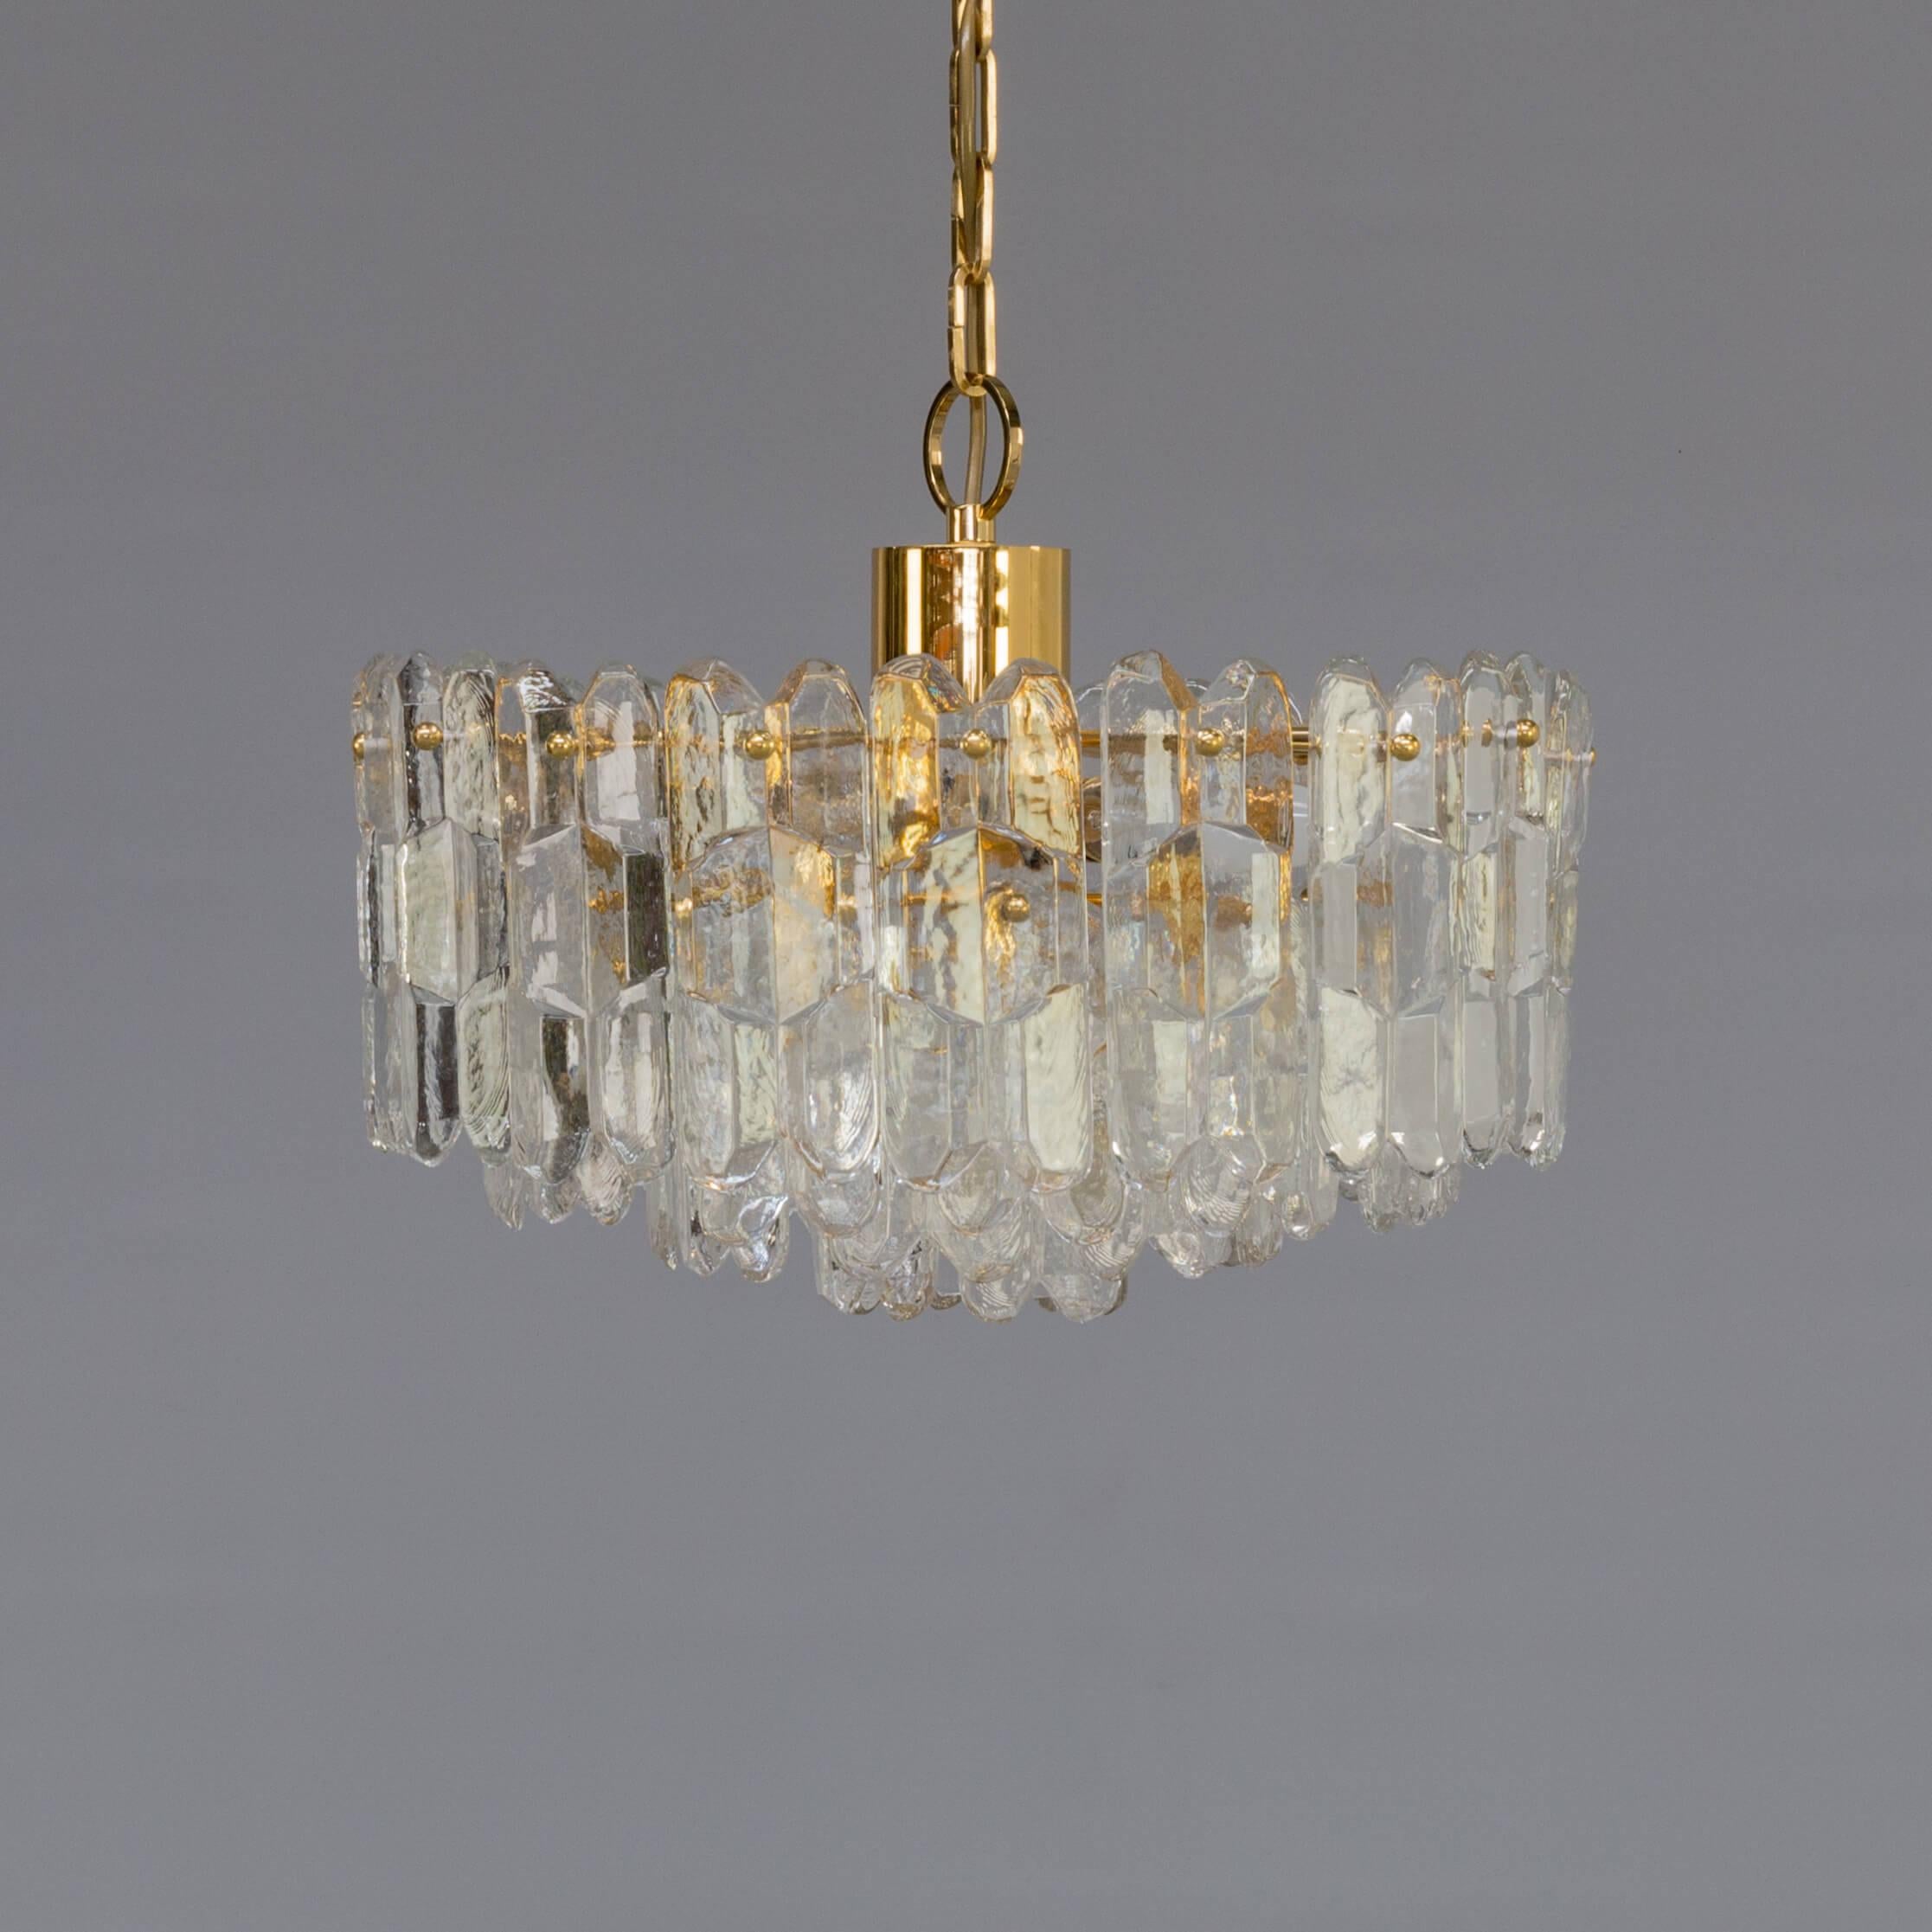 Rare and very beautiful pendant chandelier with brass frame on which beautiful individual glass elements are being mounted. Very sophisticated hanging lamp in good condition consistent with age and use. Small E14 fittings.
  